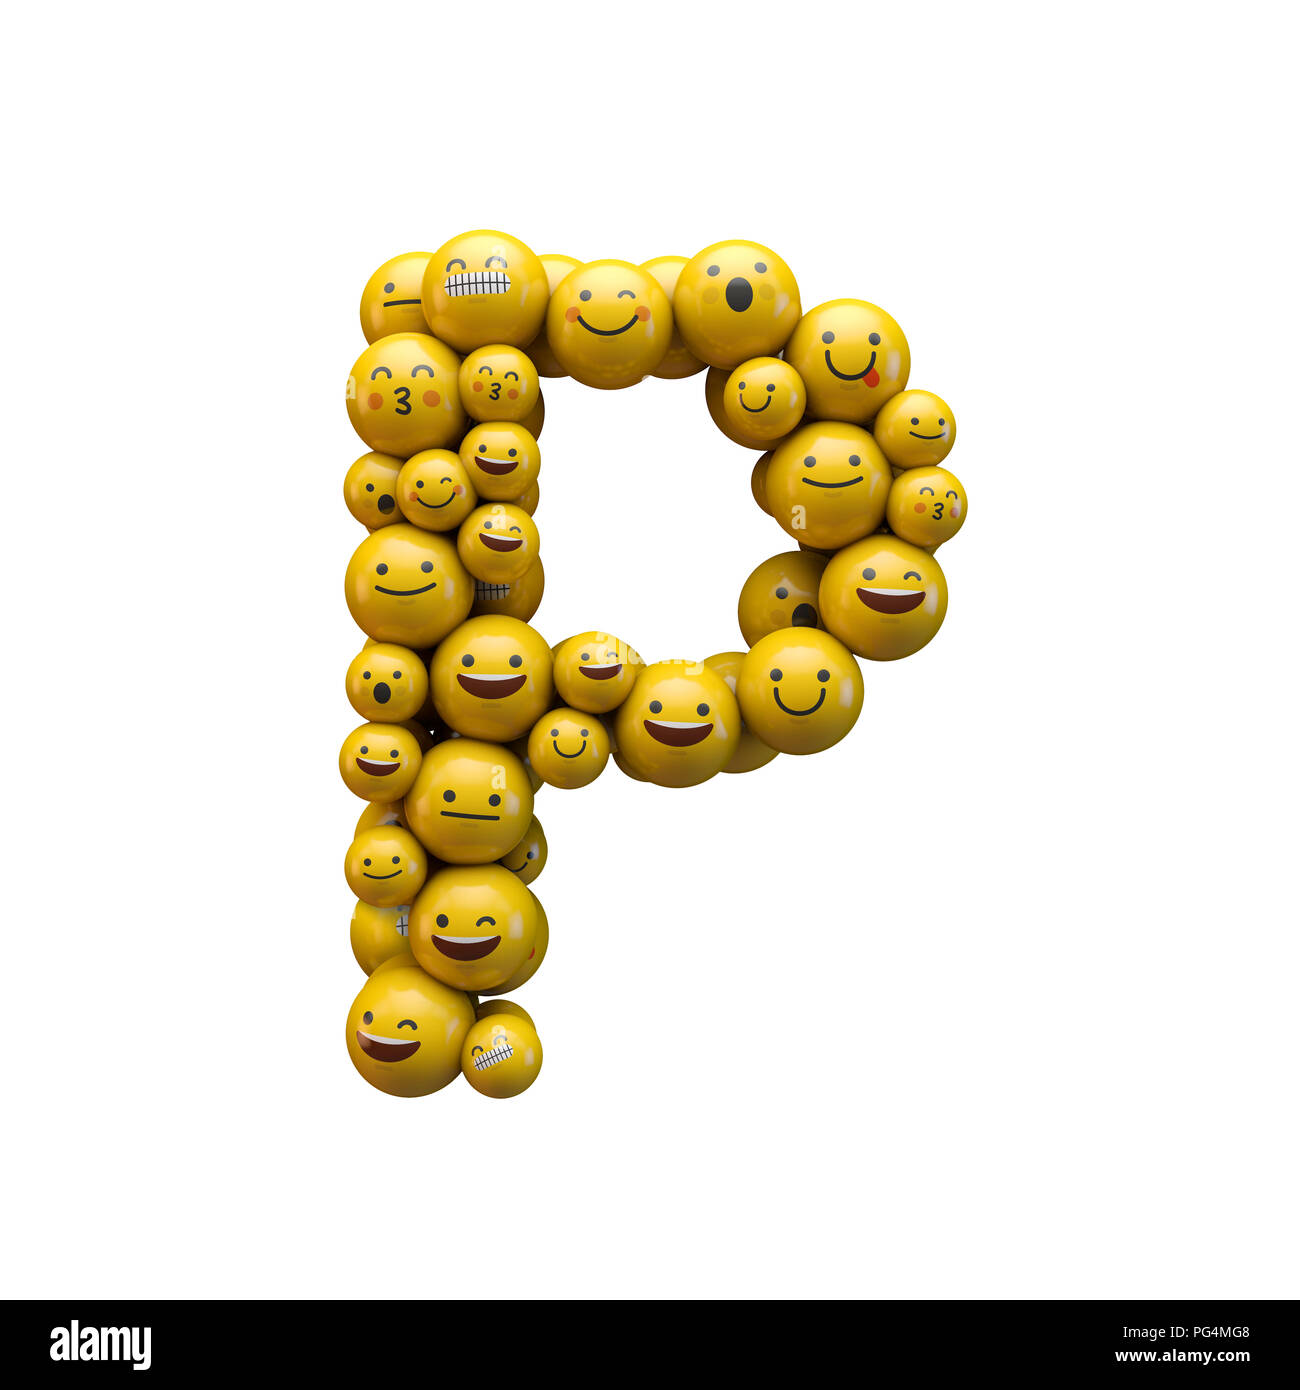 Letter P emoji character font. 3D Rendering Stock Photo